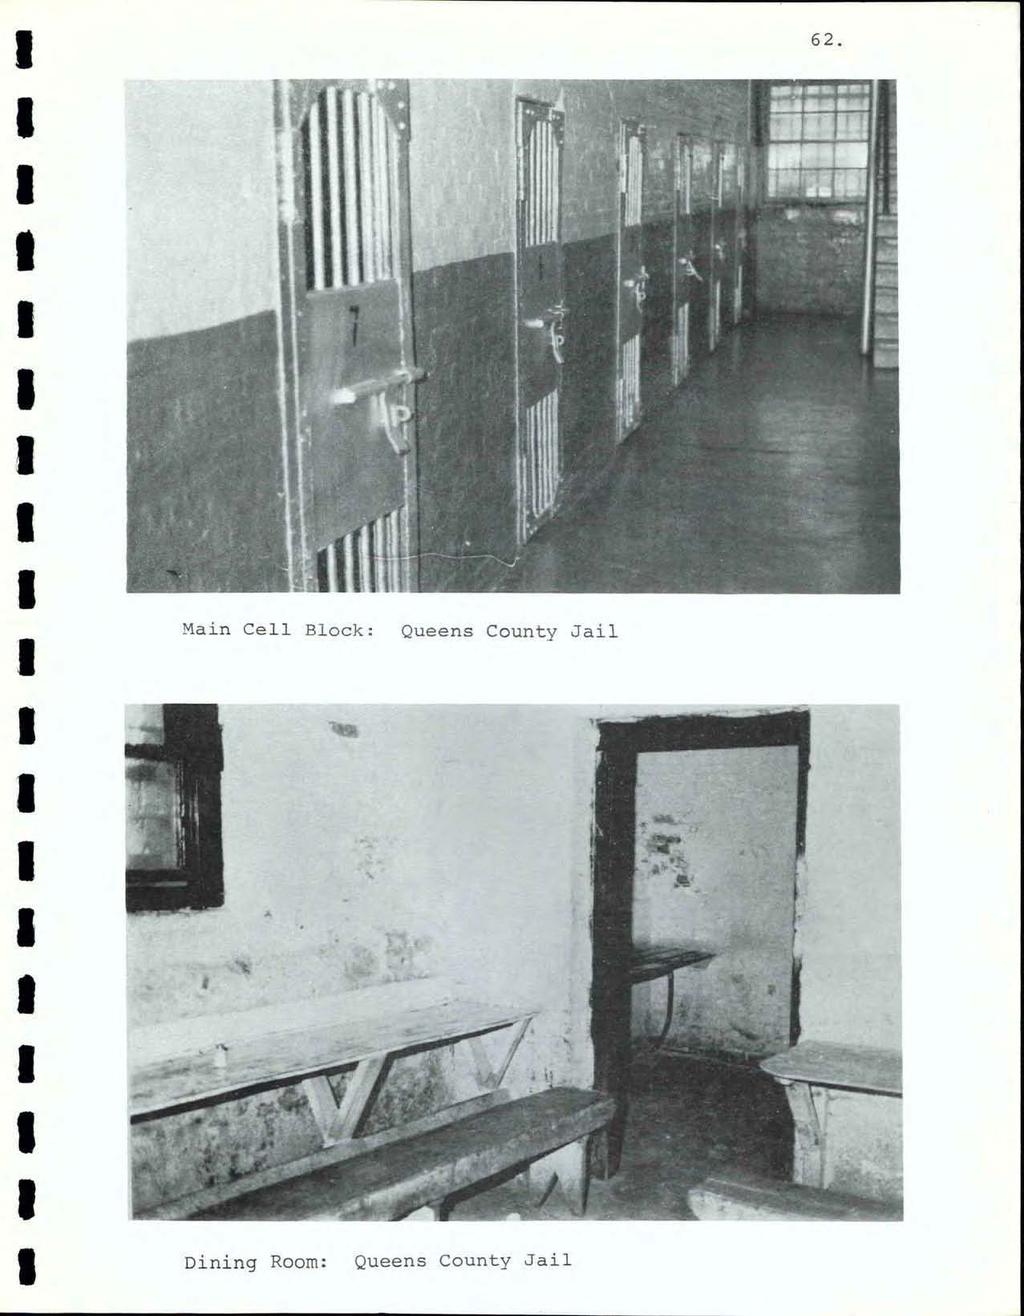 62. Main Cell Block: Queens County